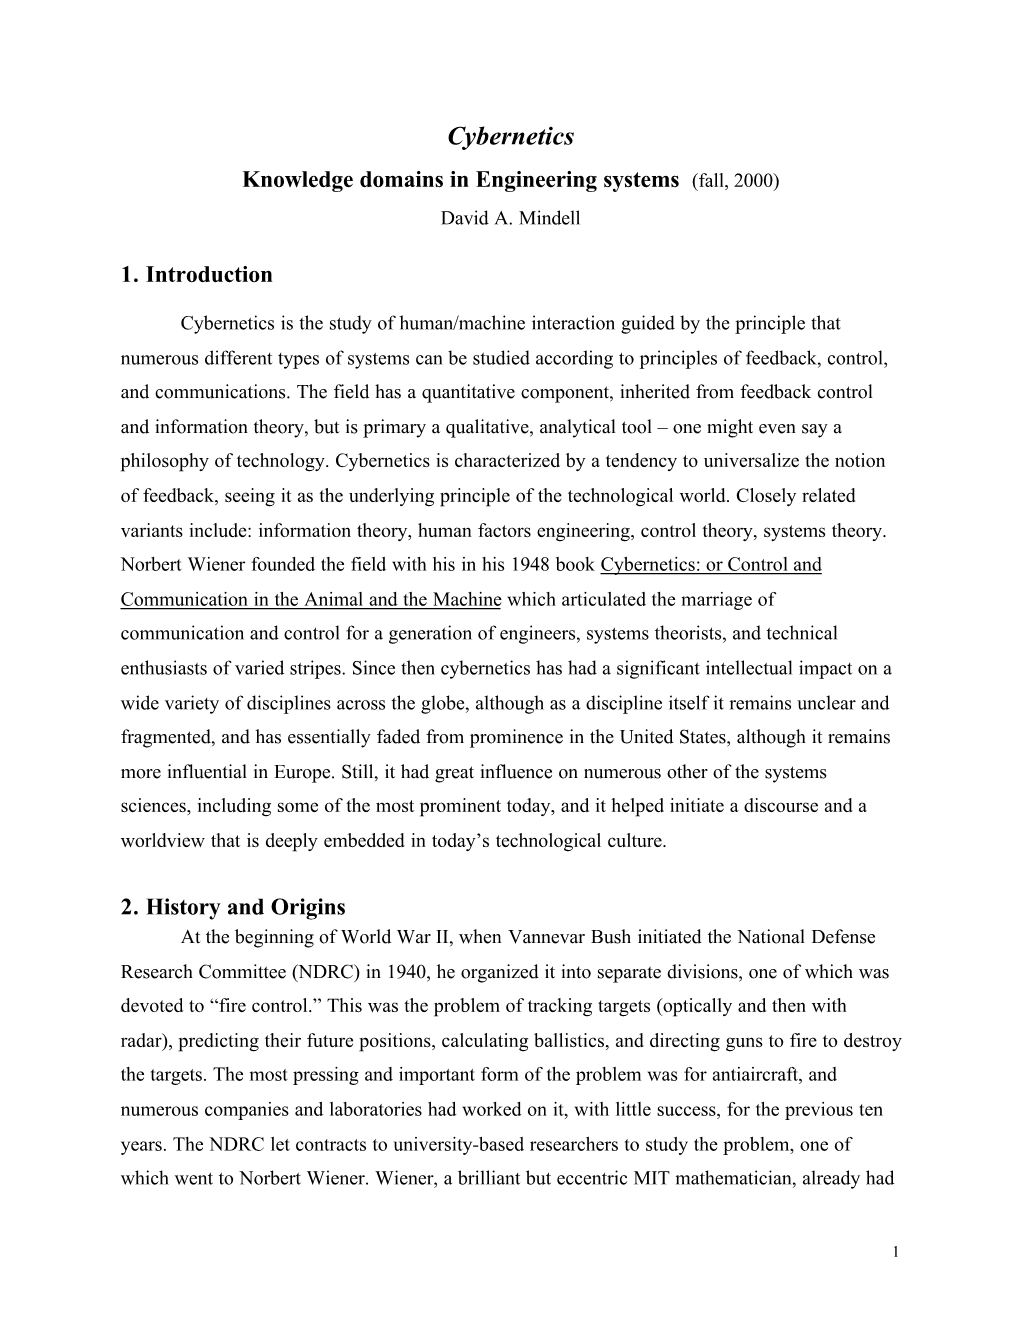 Cybernetics Knowledge Domains in Engineering Systems (Fall, 2000) David A